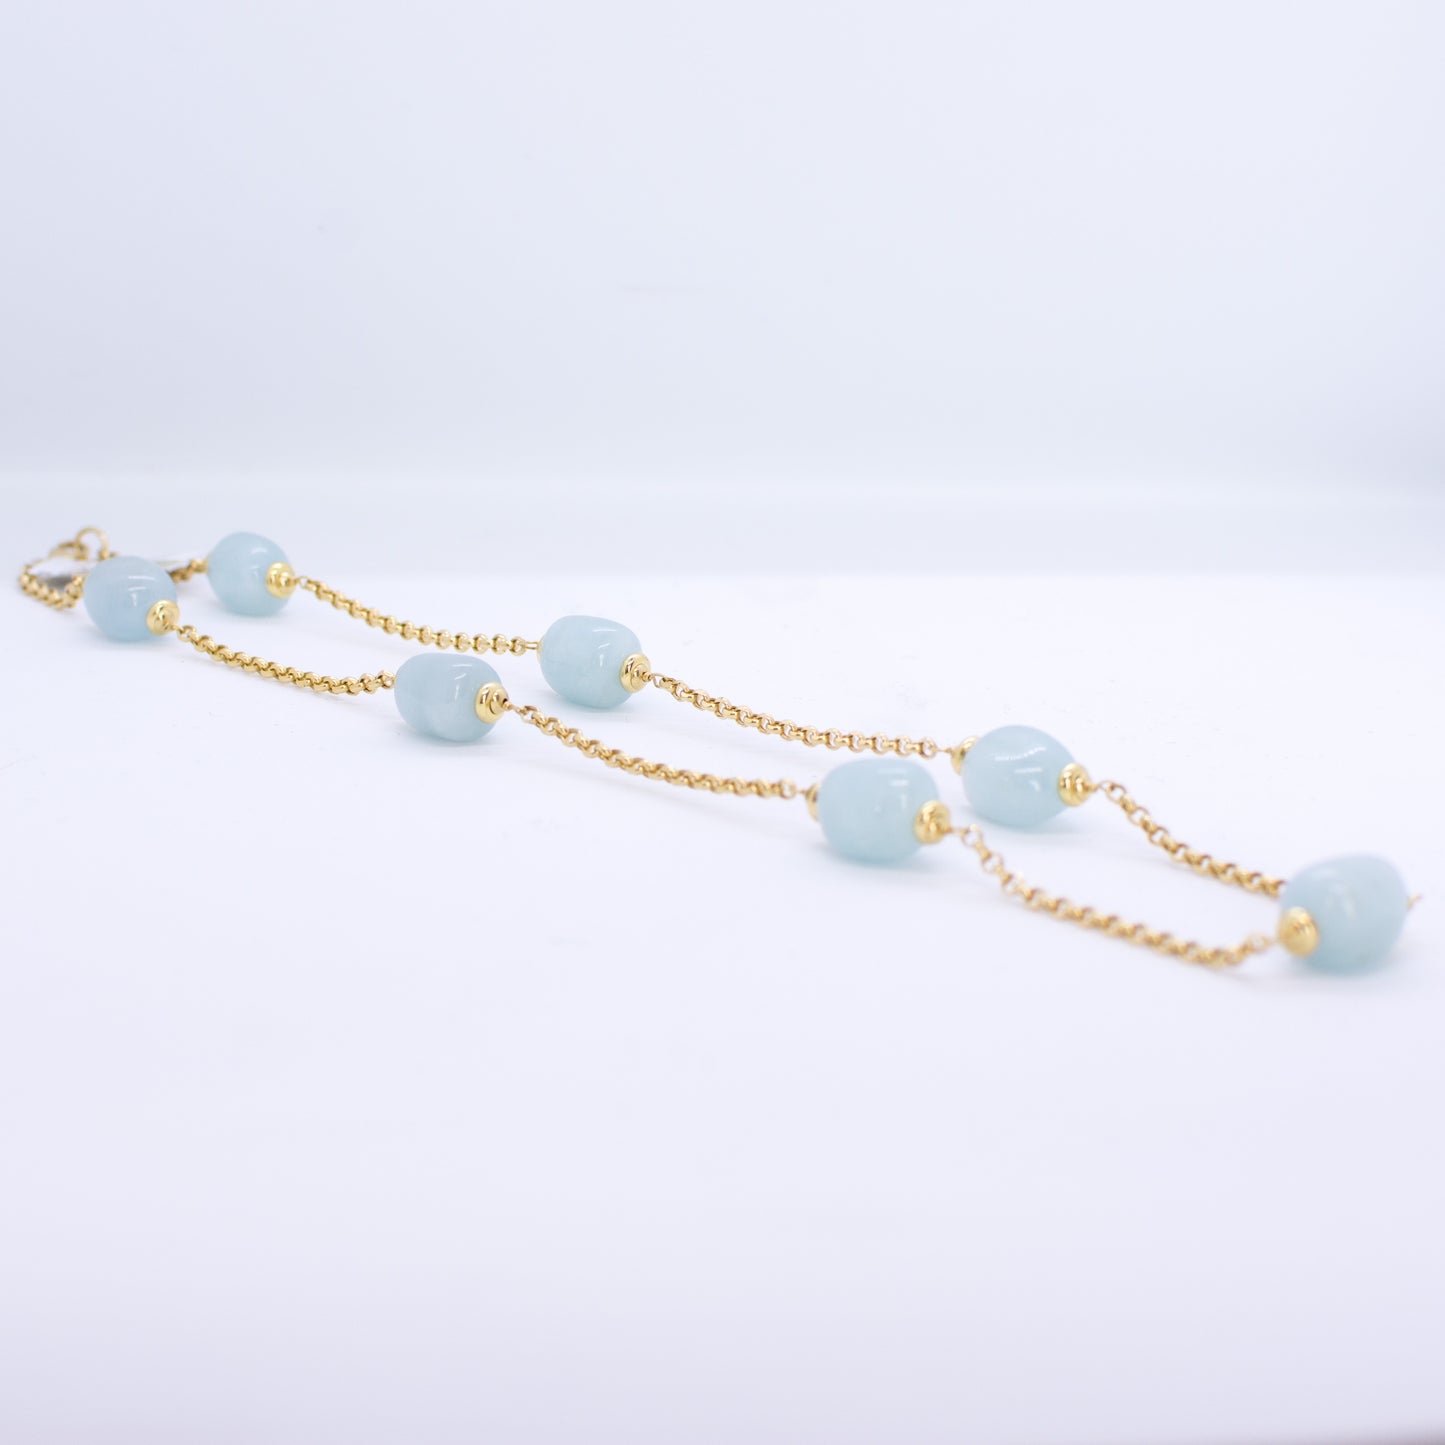 18ct Gold Silky Aquamarine and Chain Necklace Silky Aquamarine dimensions: 10mm x 12mm approximately Diamond cut 2mm gauge solid trace chain 45cm long 18ct yellow gold This item can be ordered in a variety of lengths.  Please contact us for custom requirements.